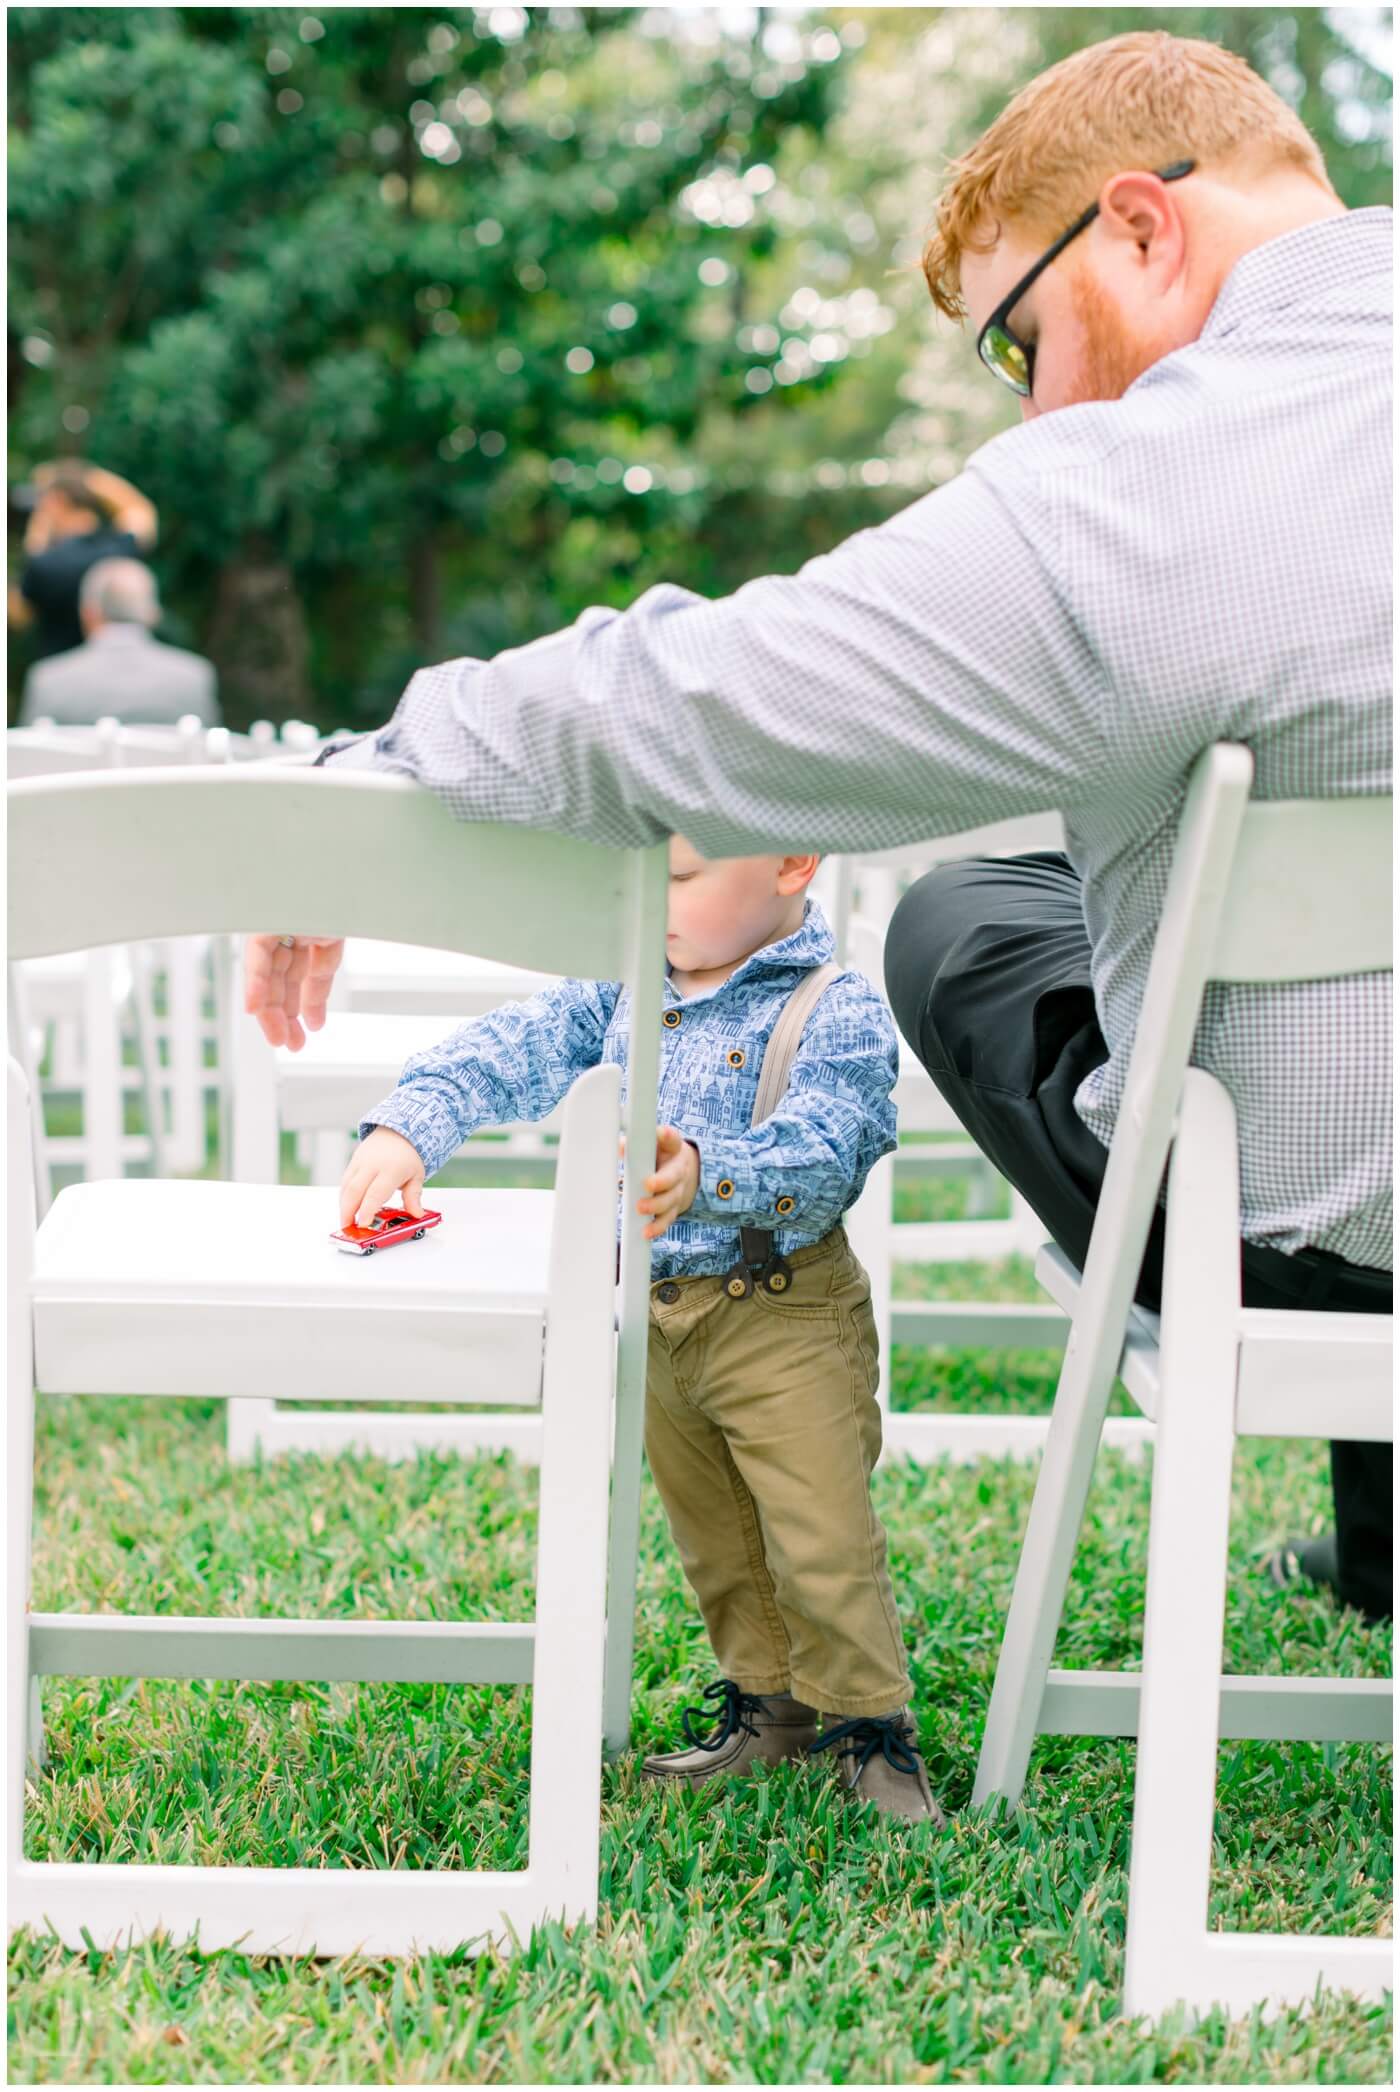 a little boy plays with a toy during the wedding ceremony